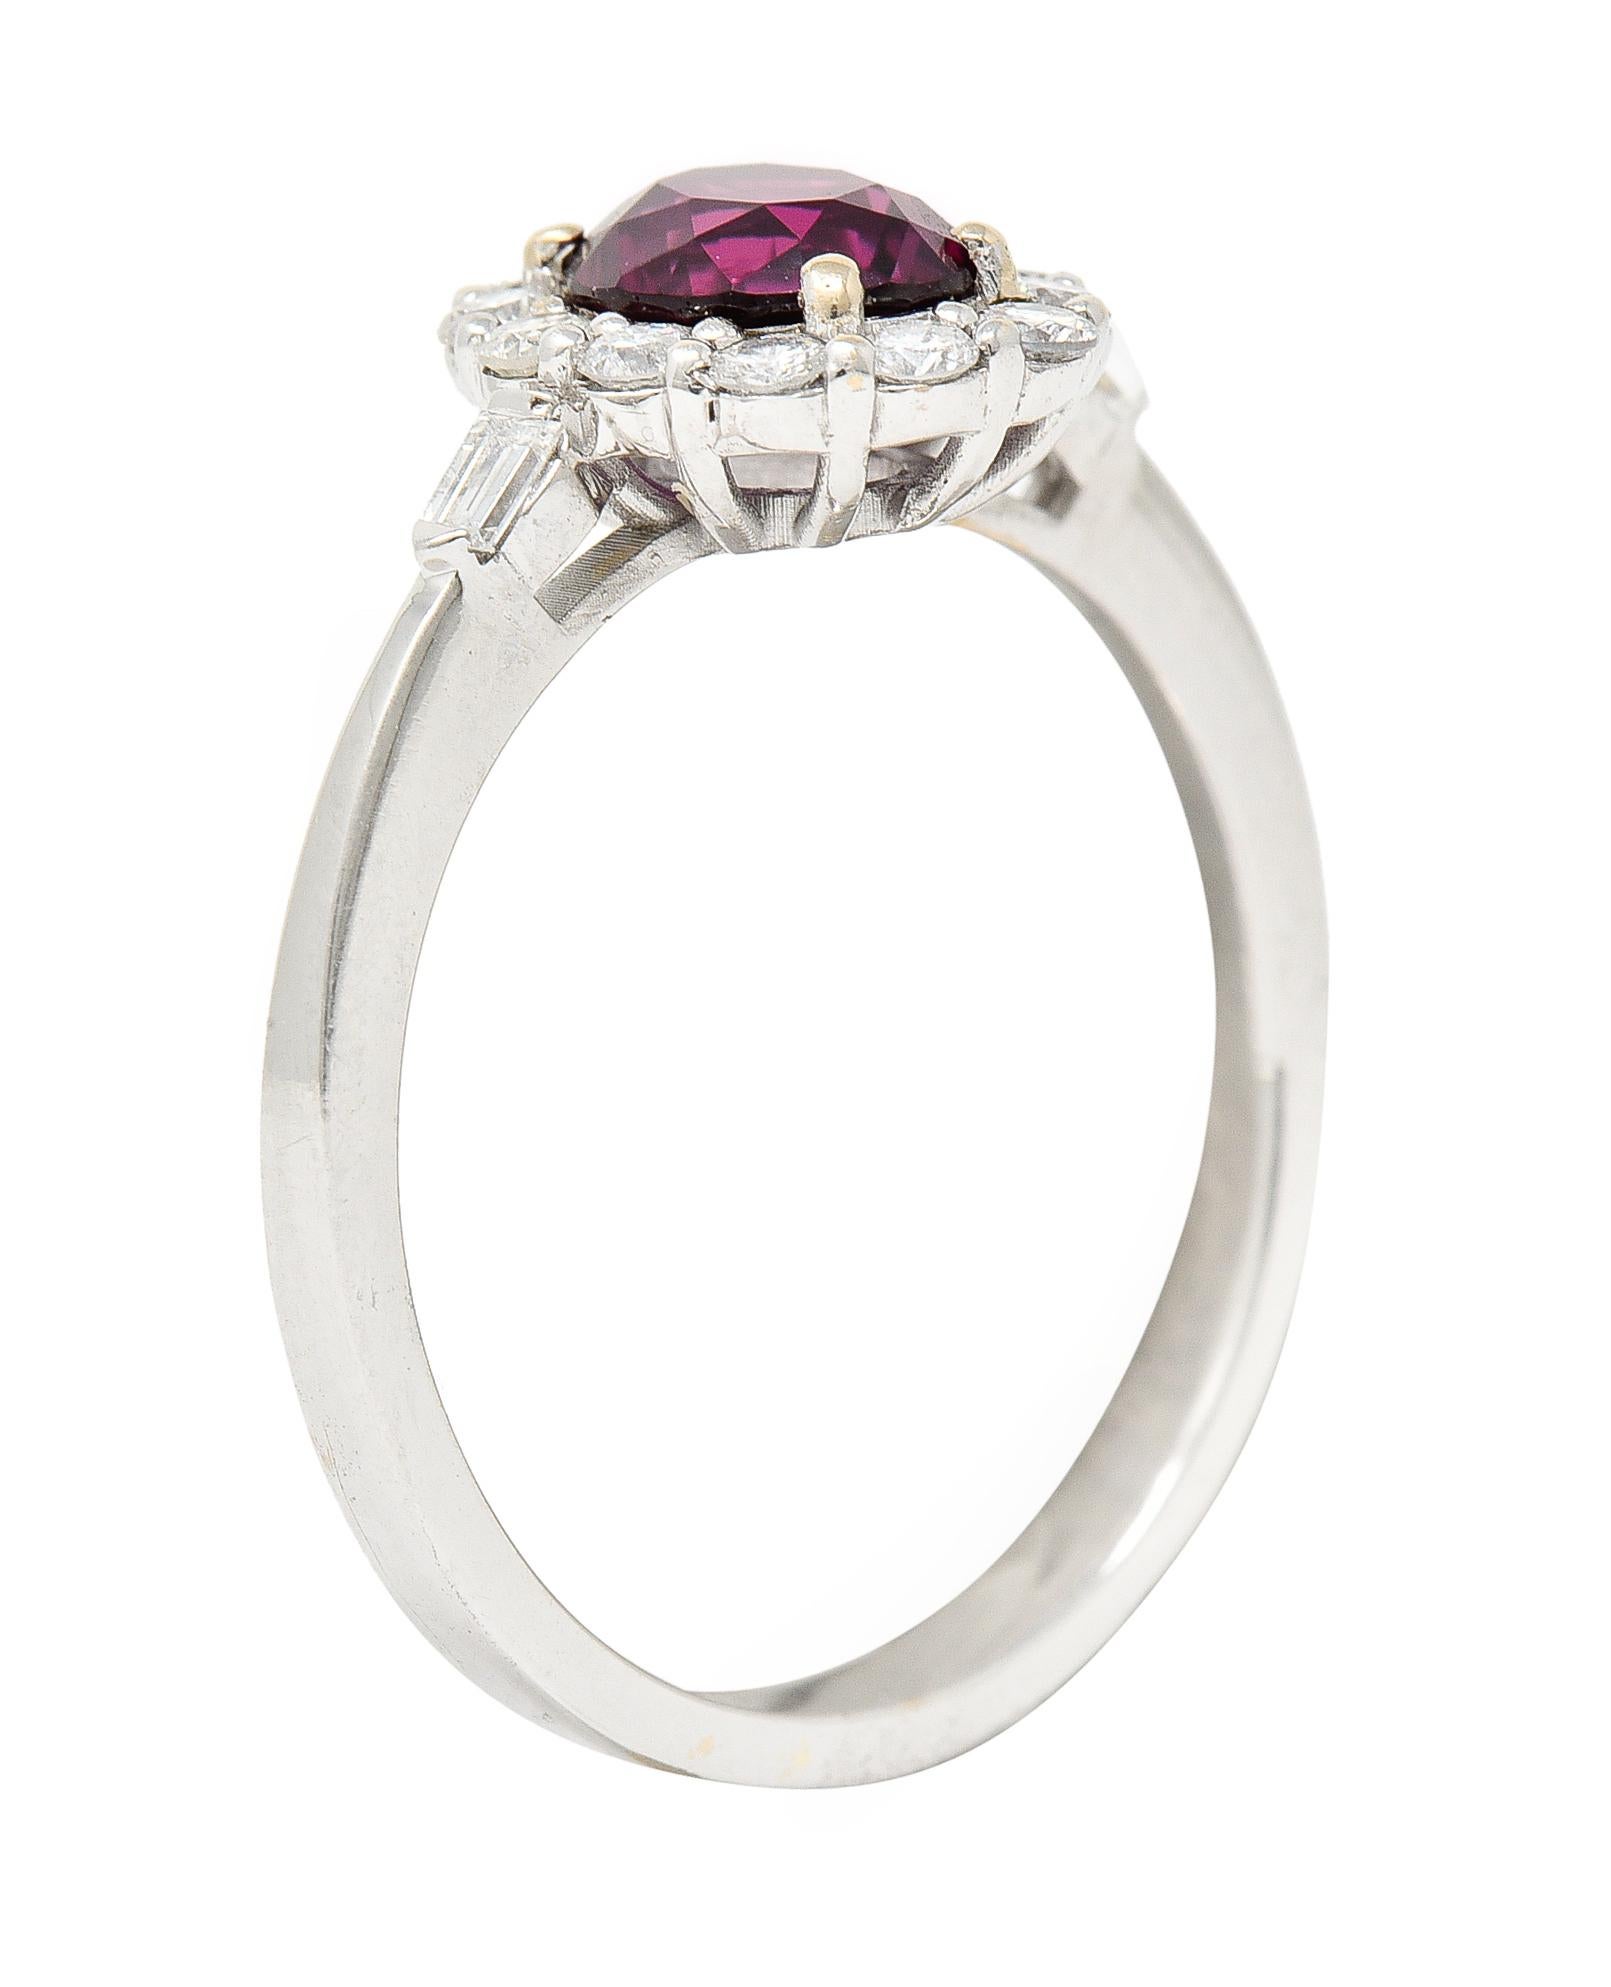 Contemporary 1.80 Carats Ruby Diamond 18 Karat White Gold Halo Ring GIA For Sale 3